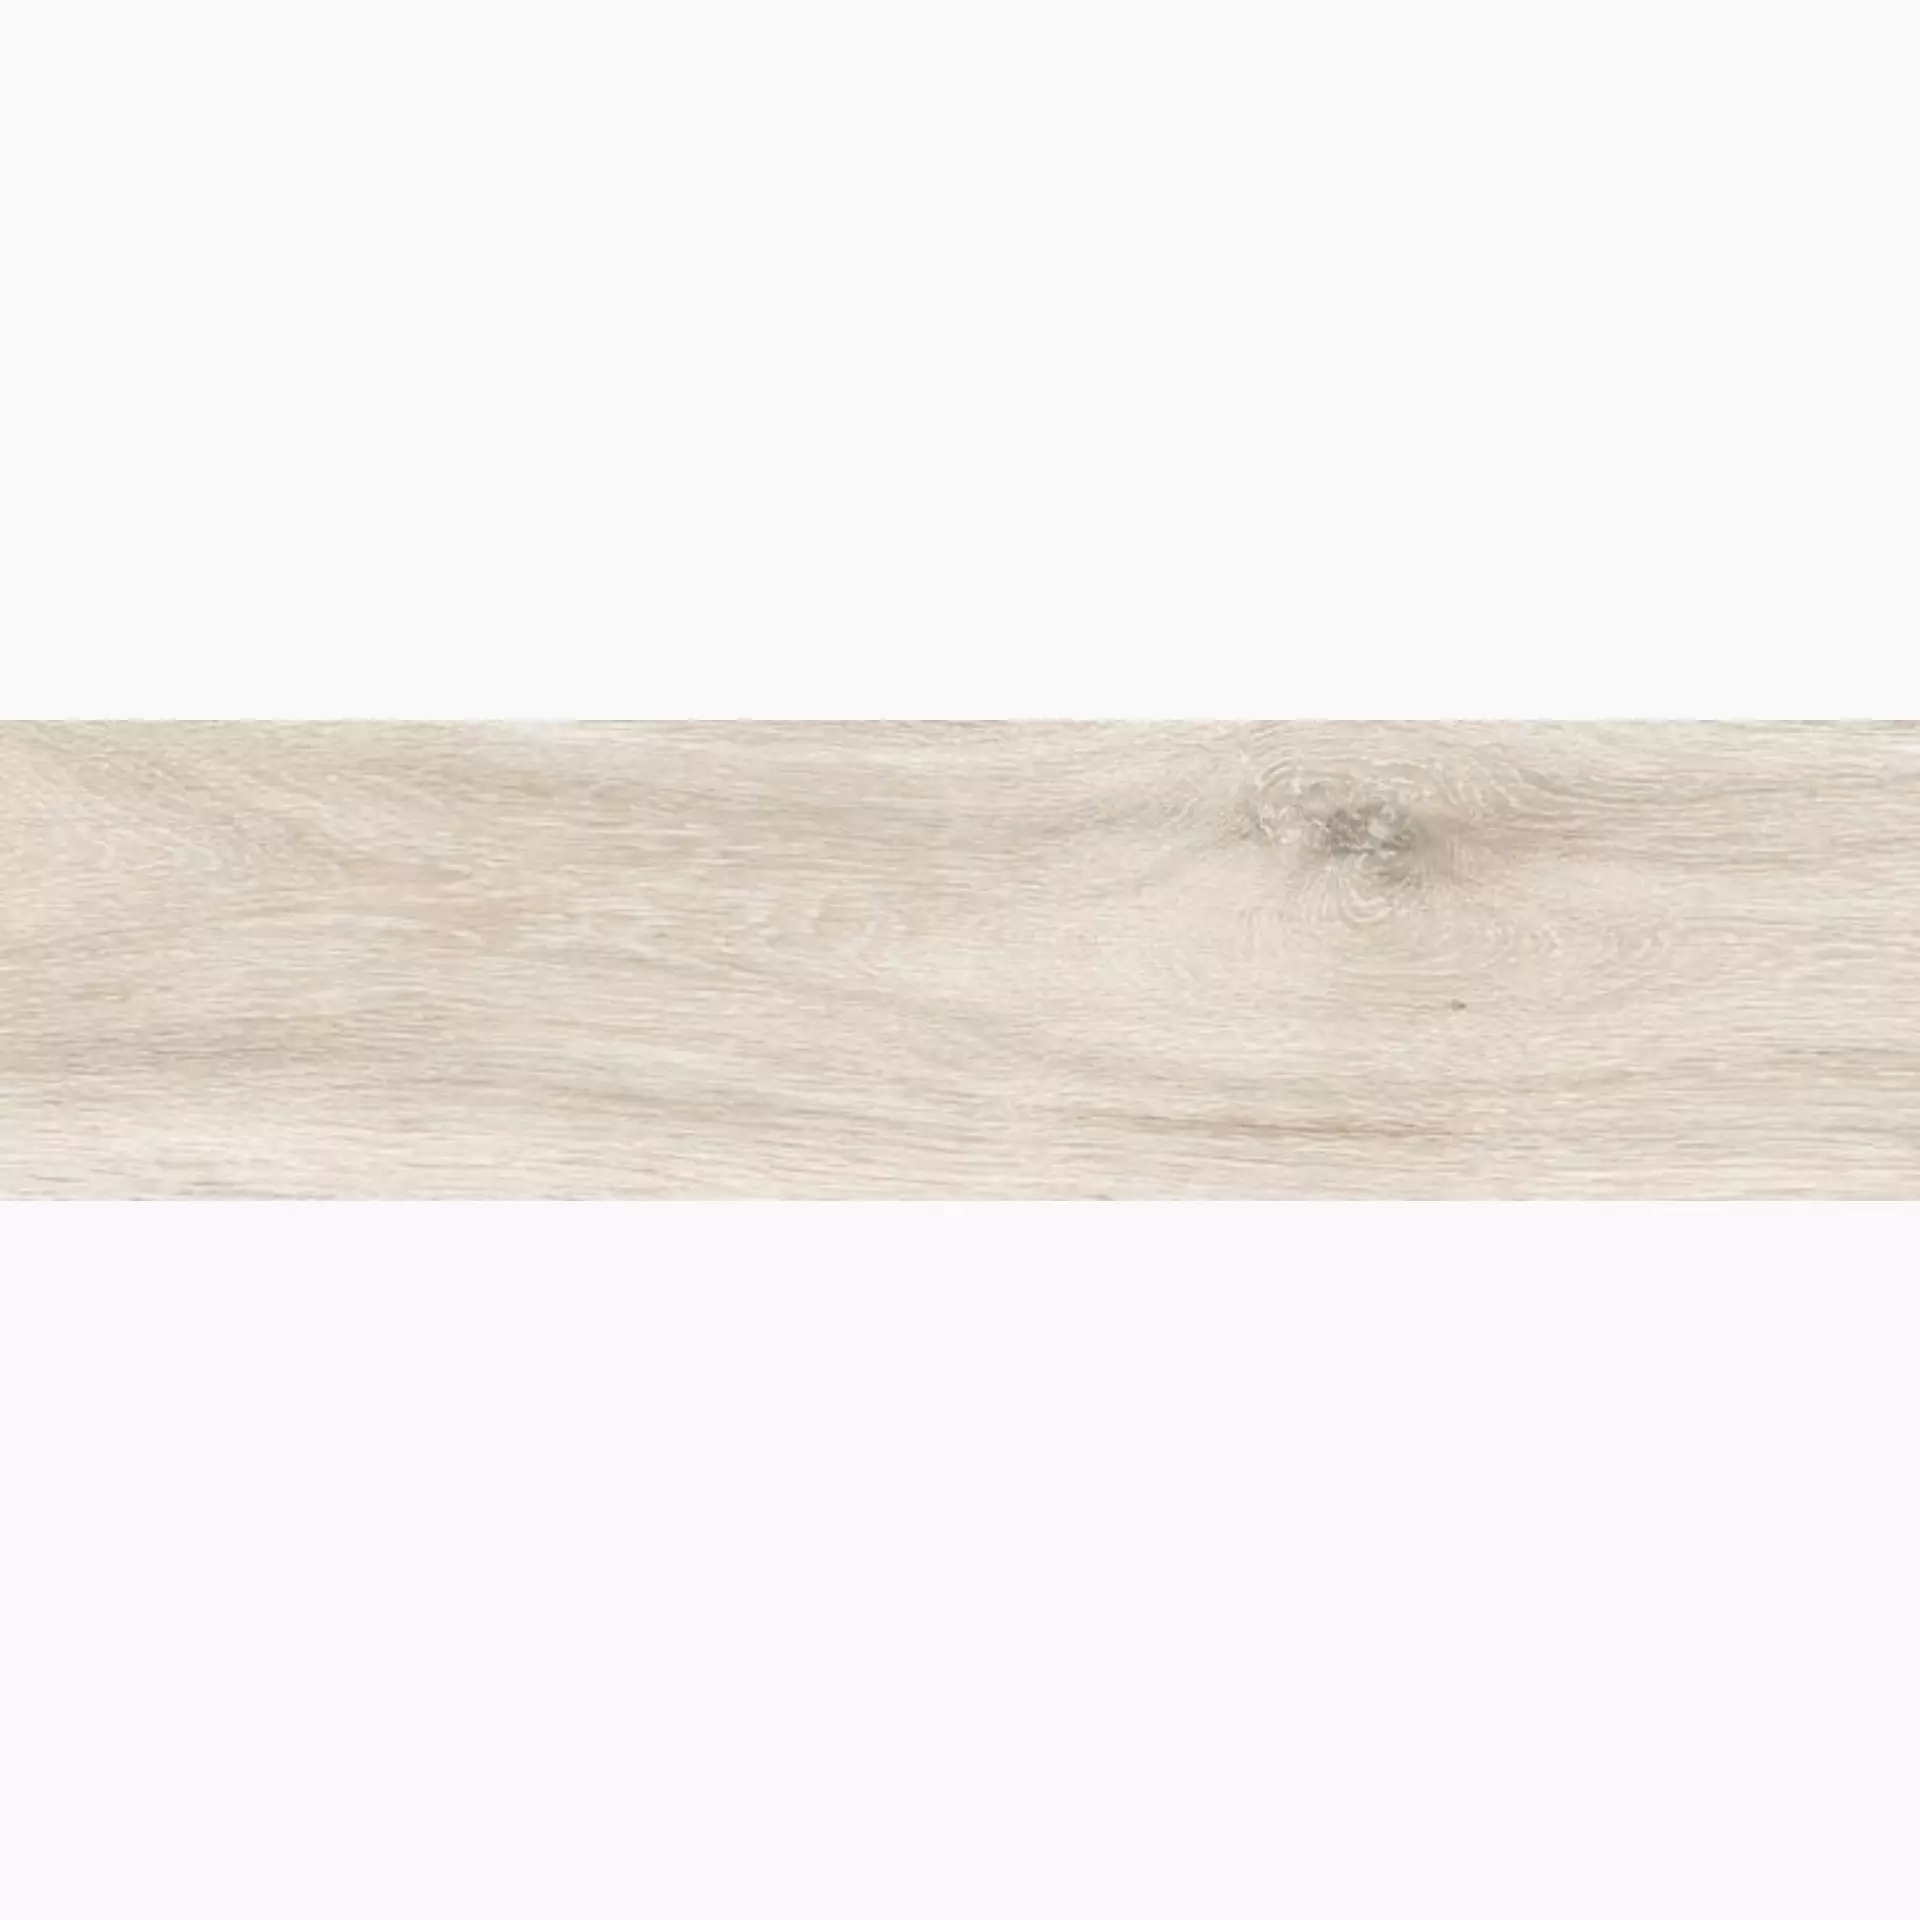 Sant Agostino Barkwood White Natural CSABA7WH30 30x120cm rectified 10mm